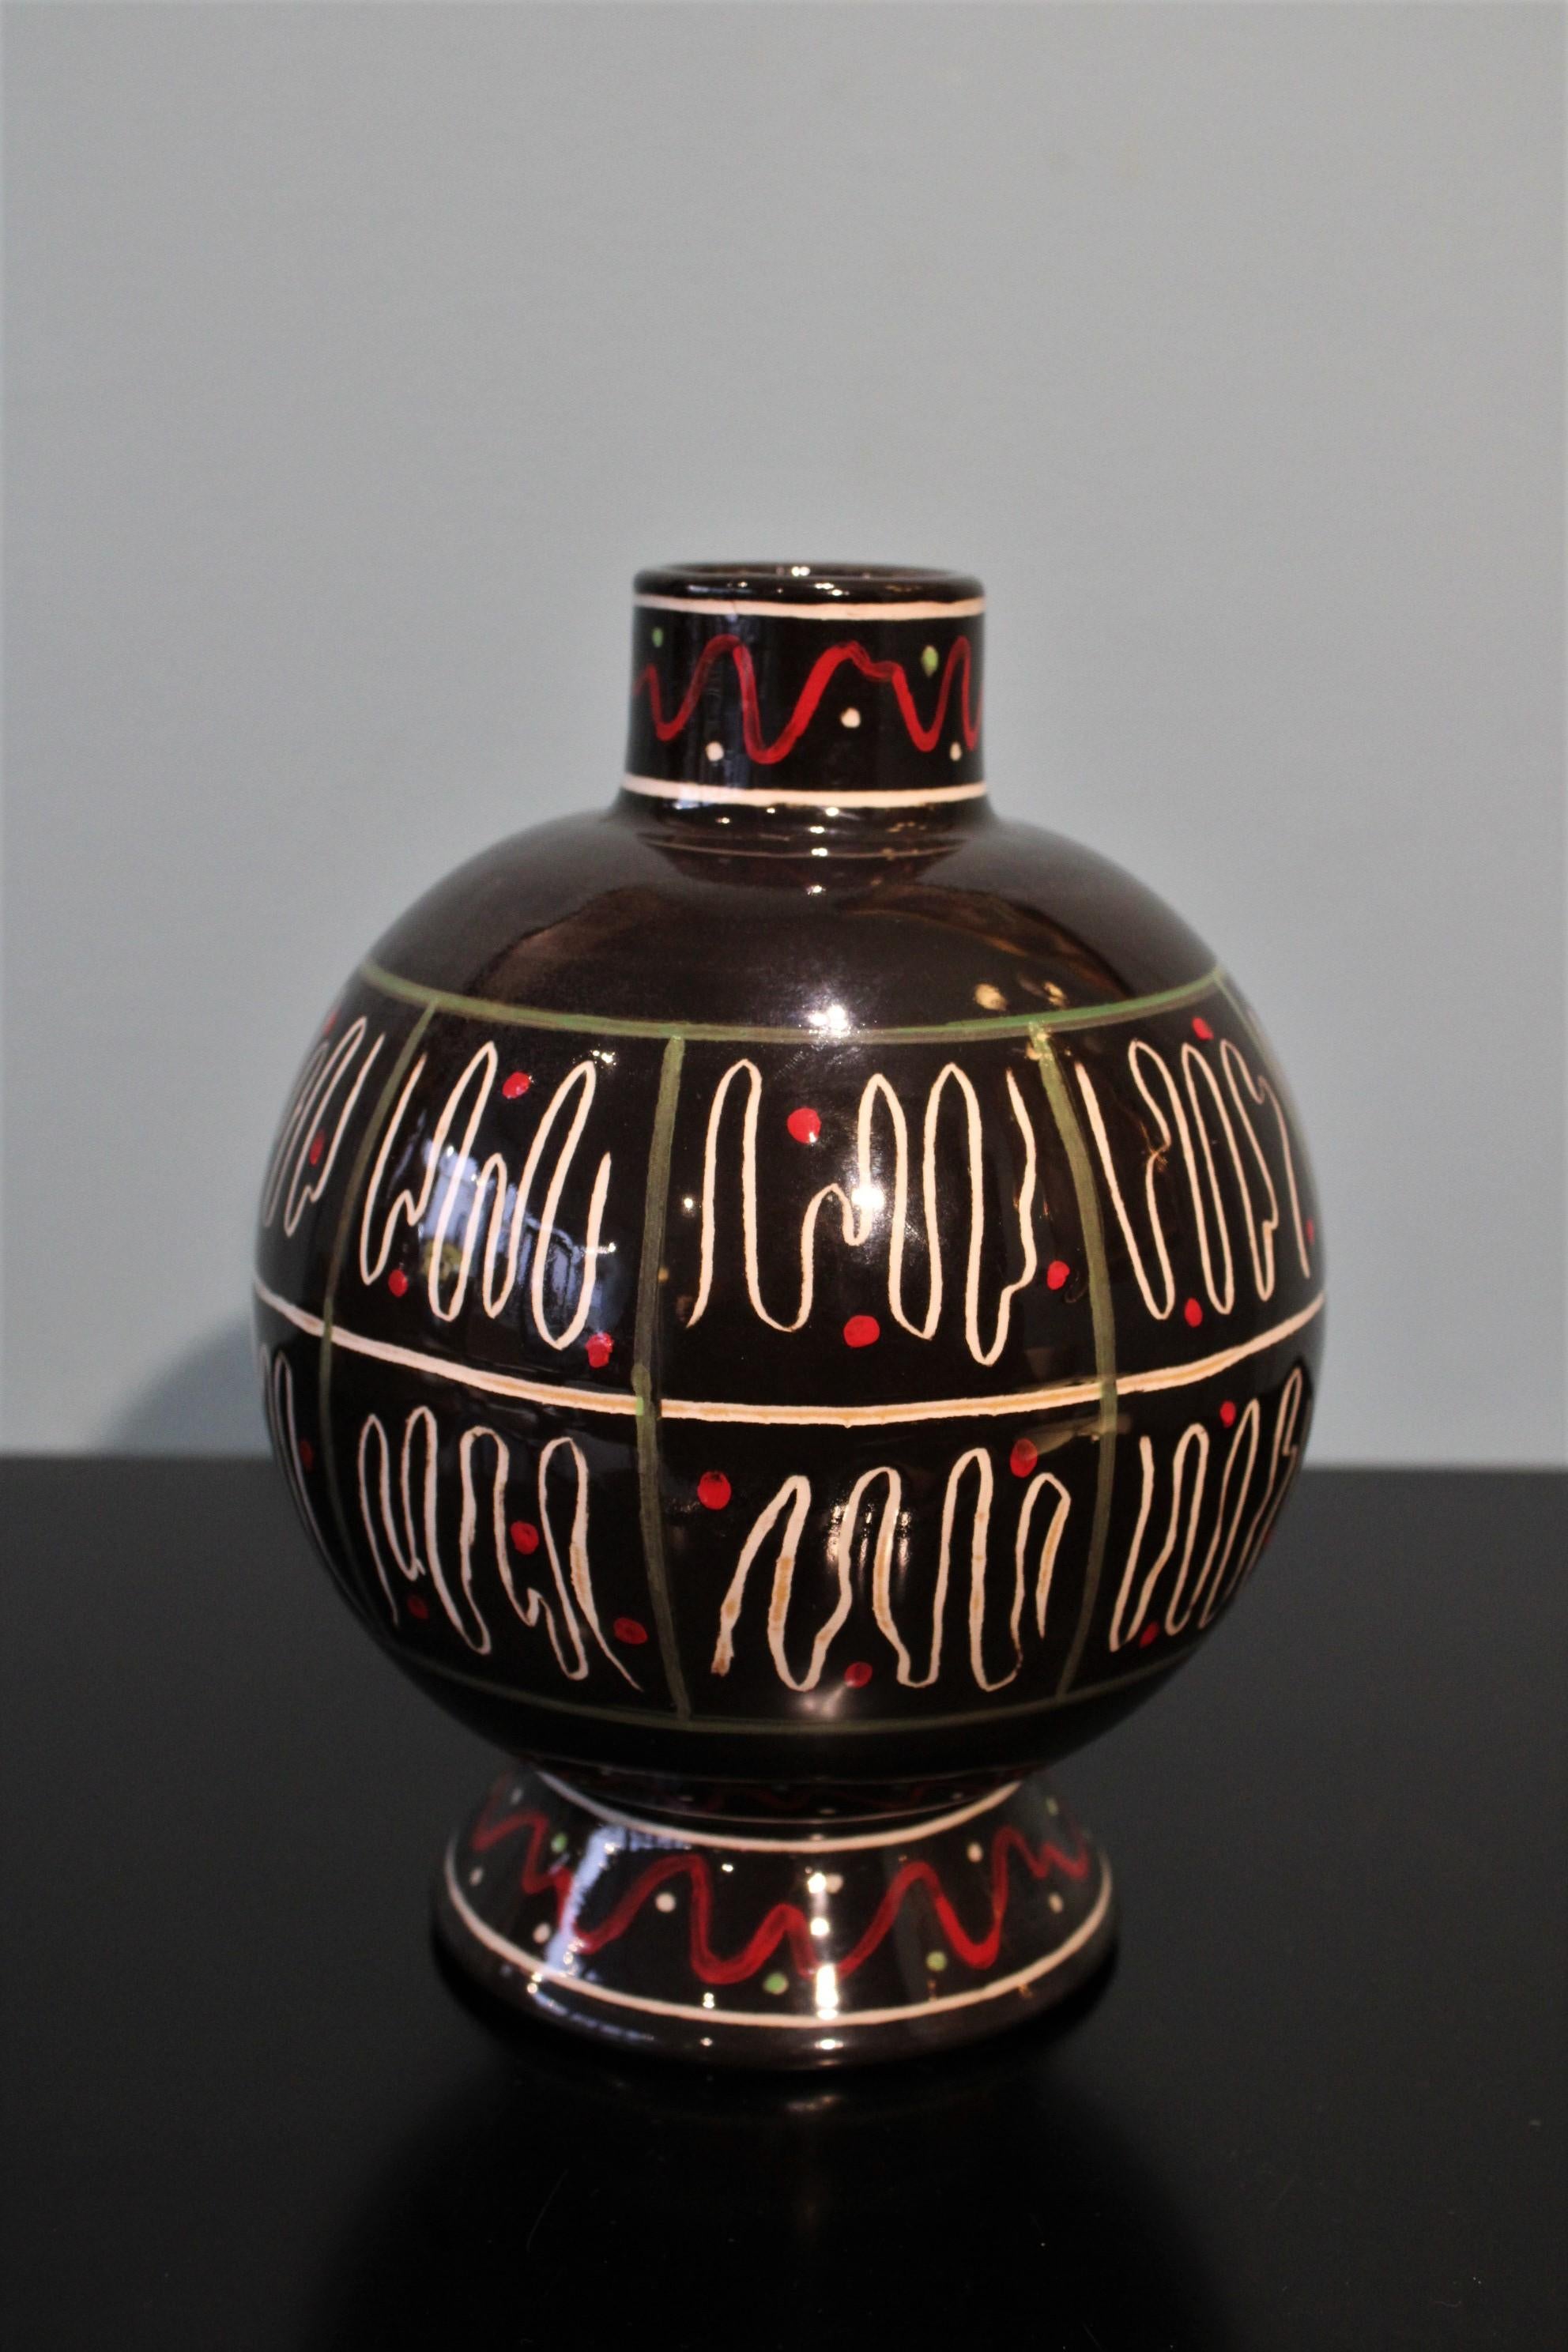 Rometti ceramic vase.
Black color with red, green and white abstract decor. 
Circa 1940. 
Italian manufacturer Rometti. 
Signed under the base.